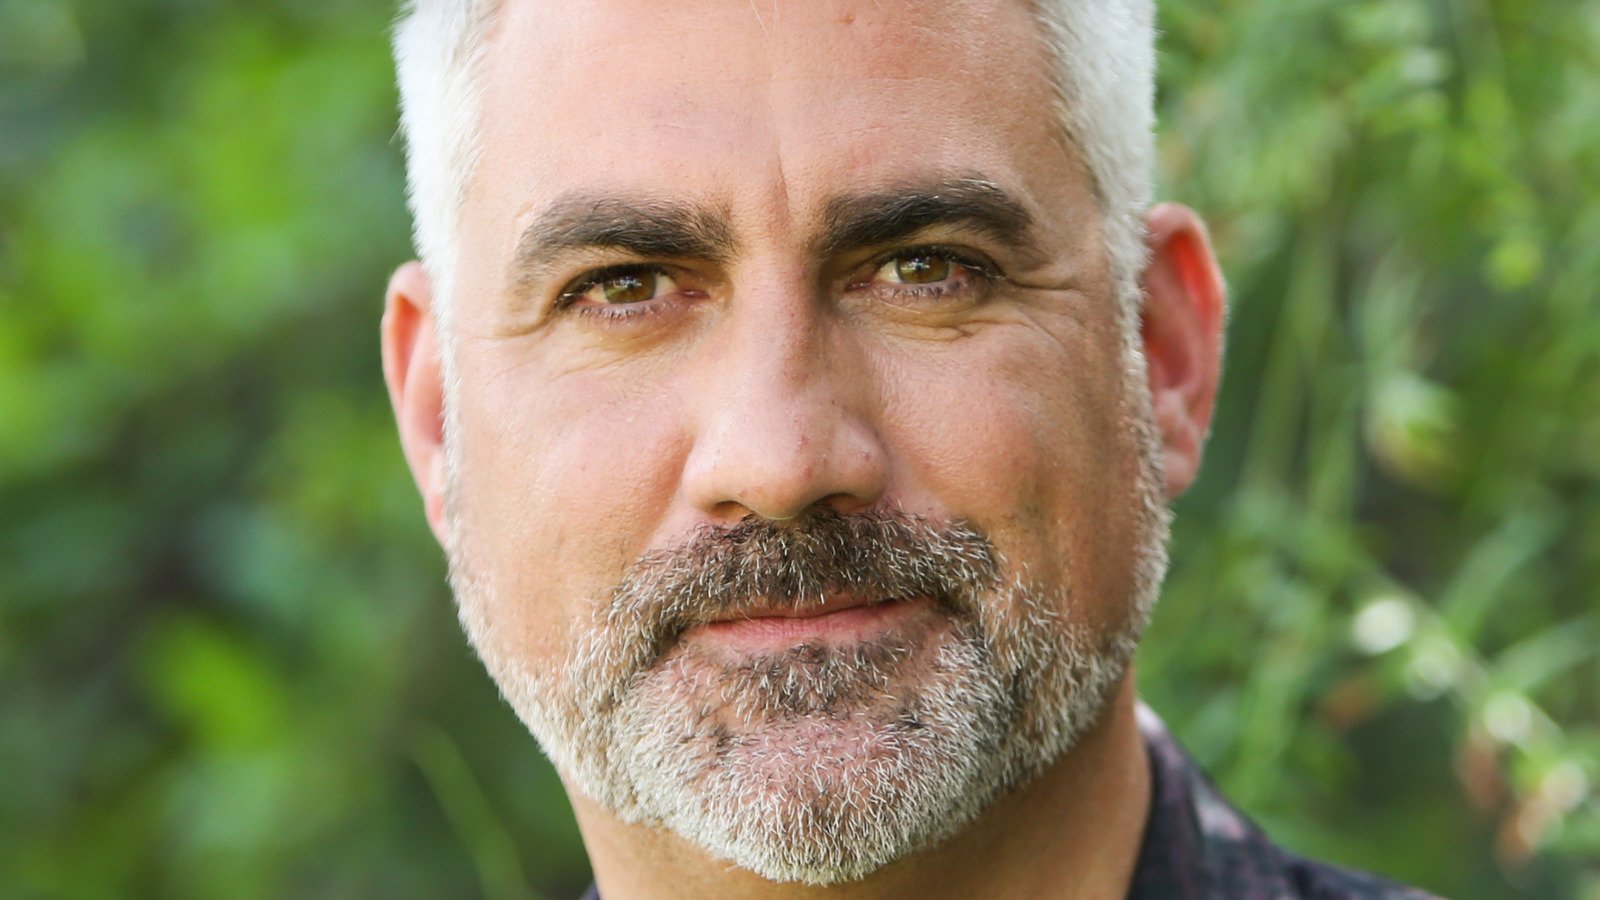 Whatever Happened To Taylor Hicks From American Idol? - The List